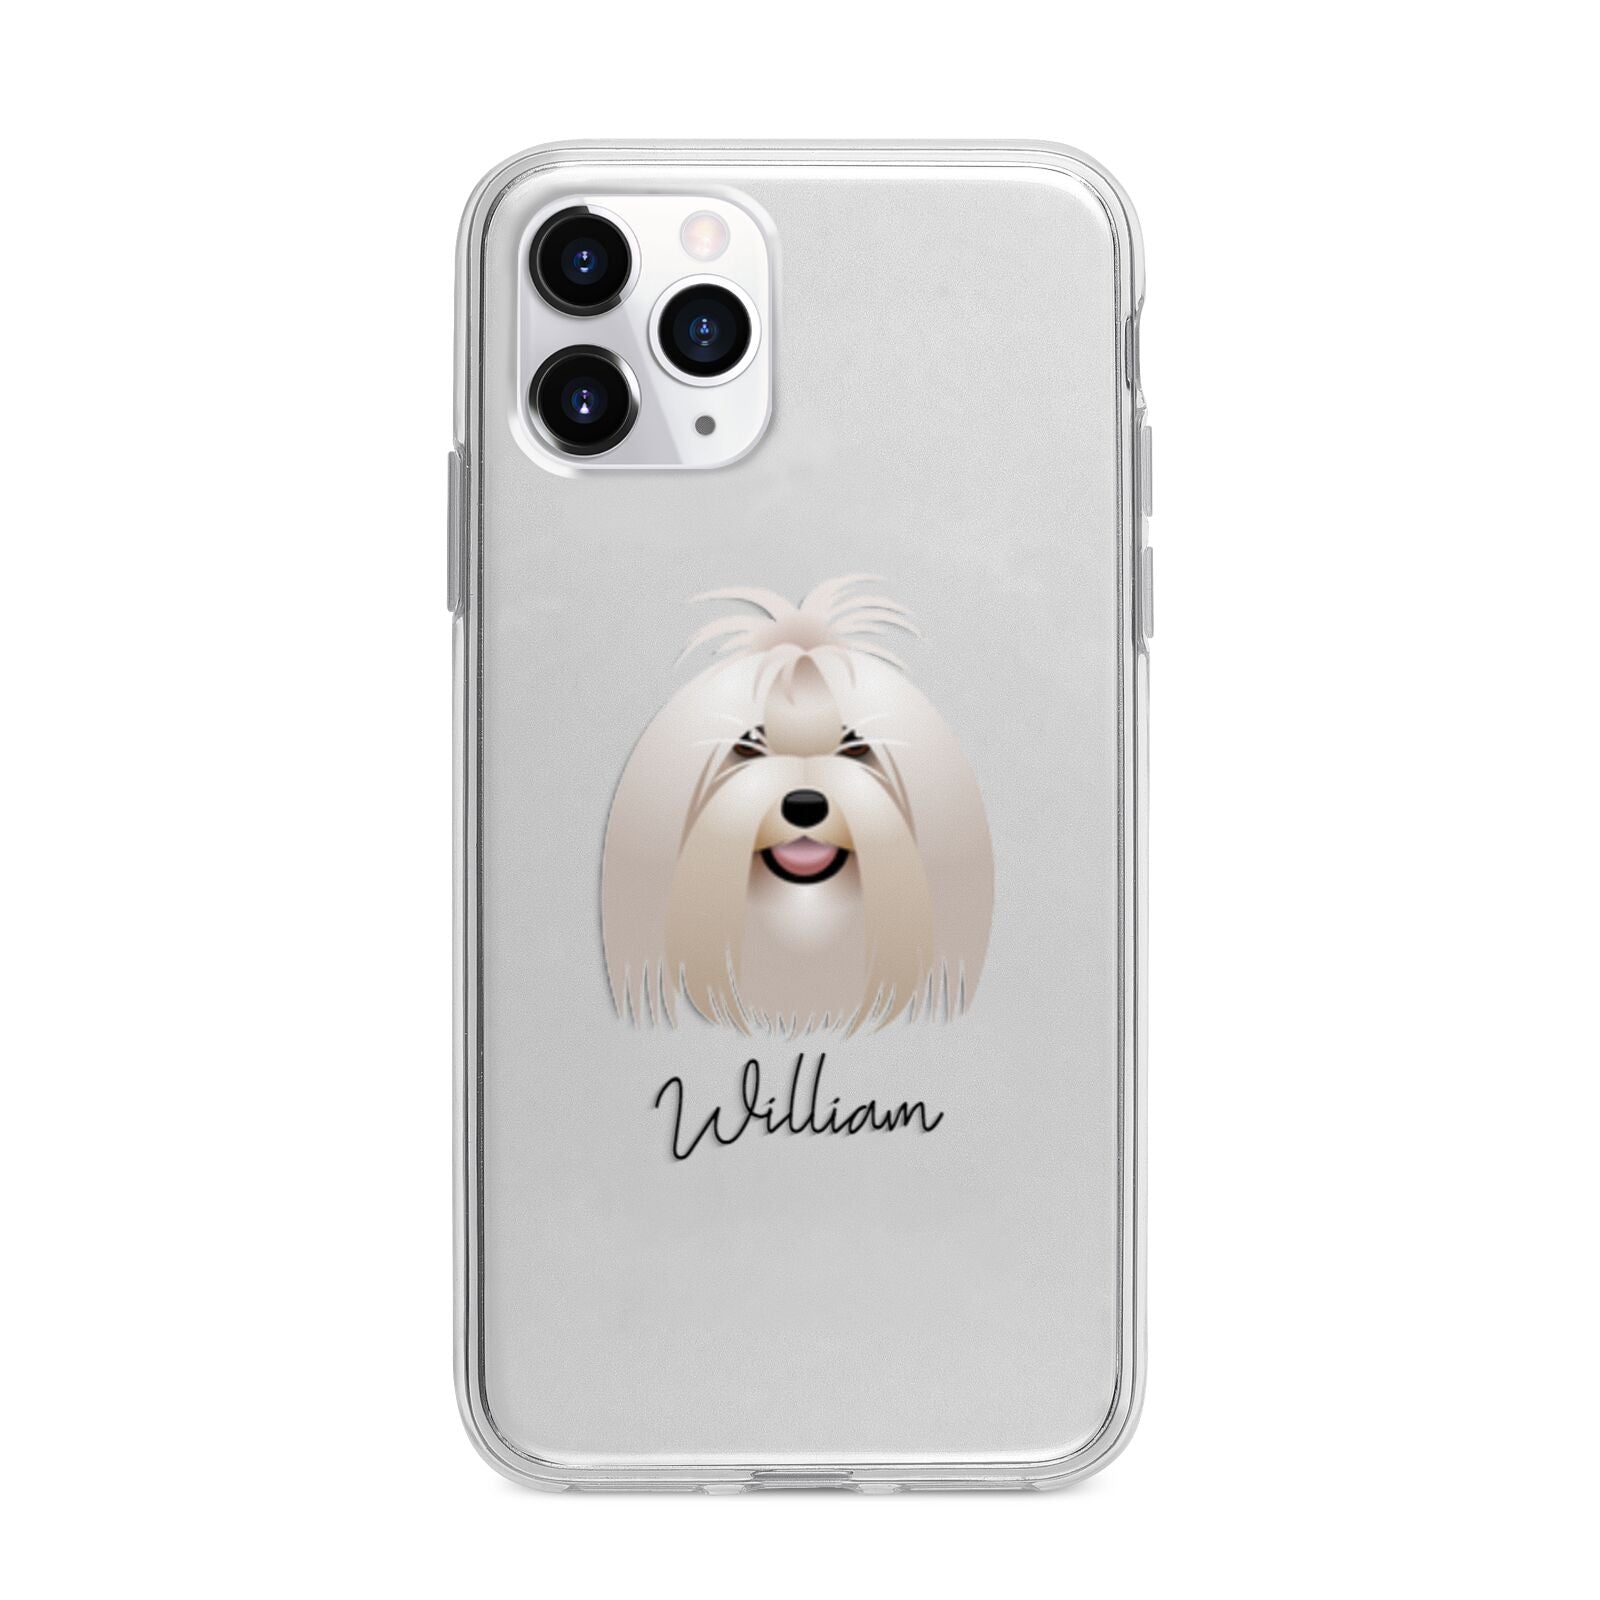 Maltese Personalised Apple iPhone 11 Pro Max in Silver with Bumper Case